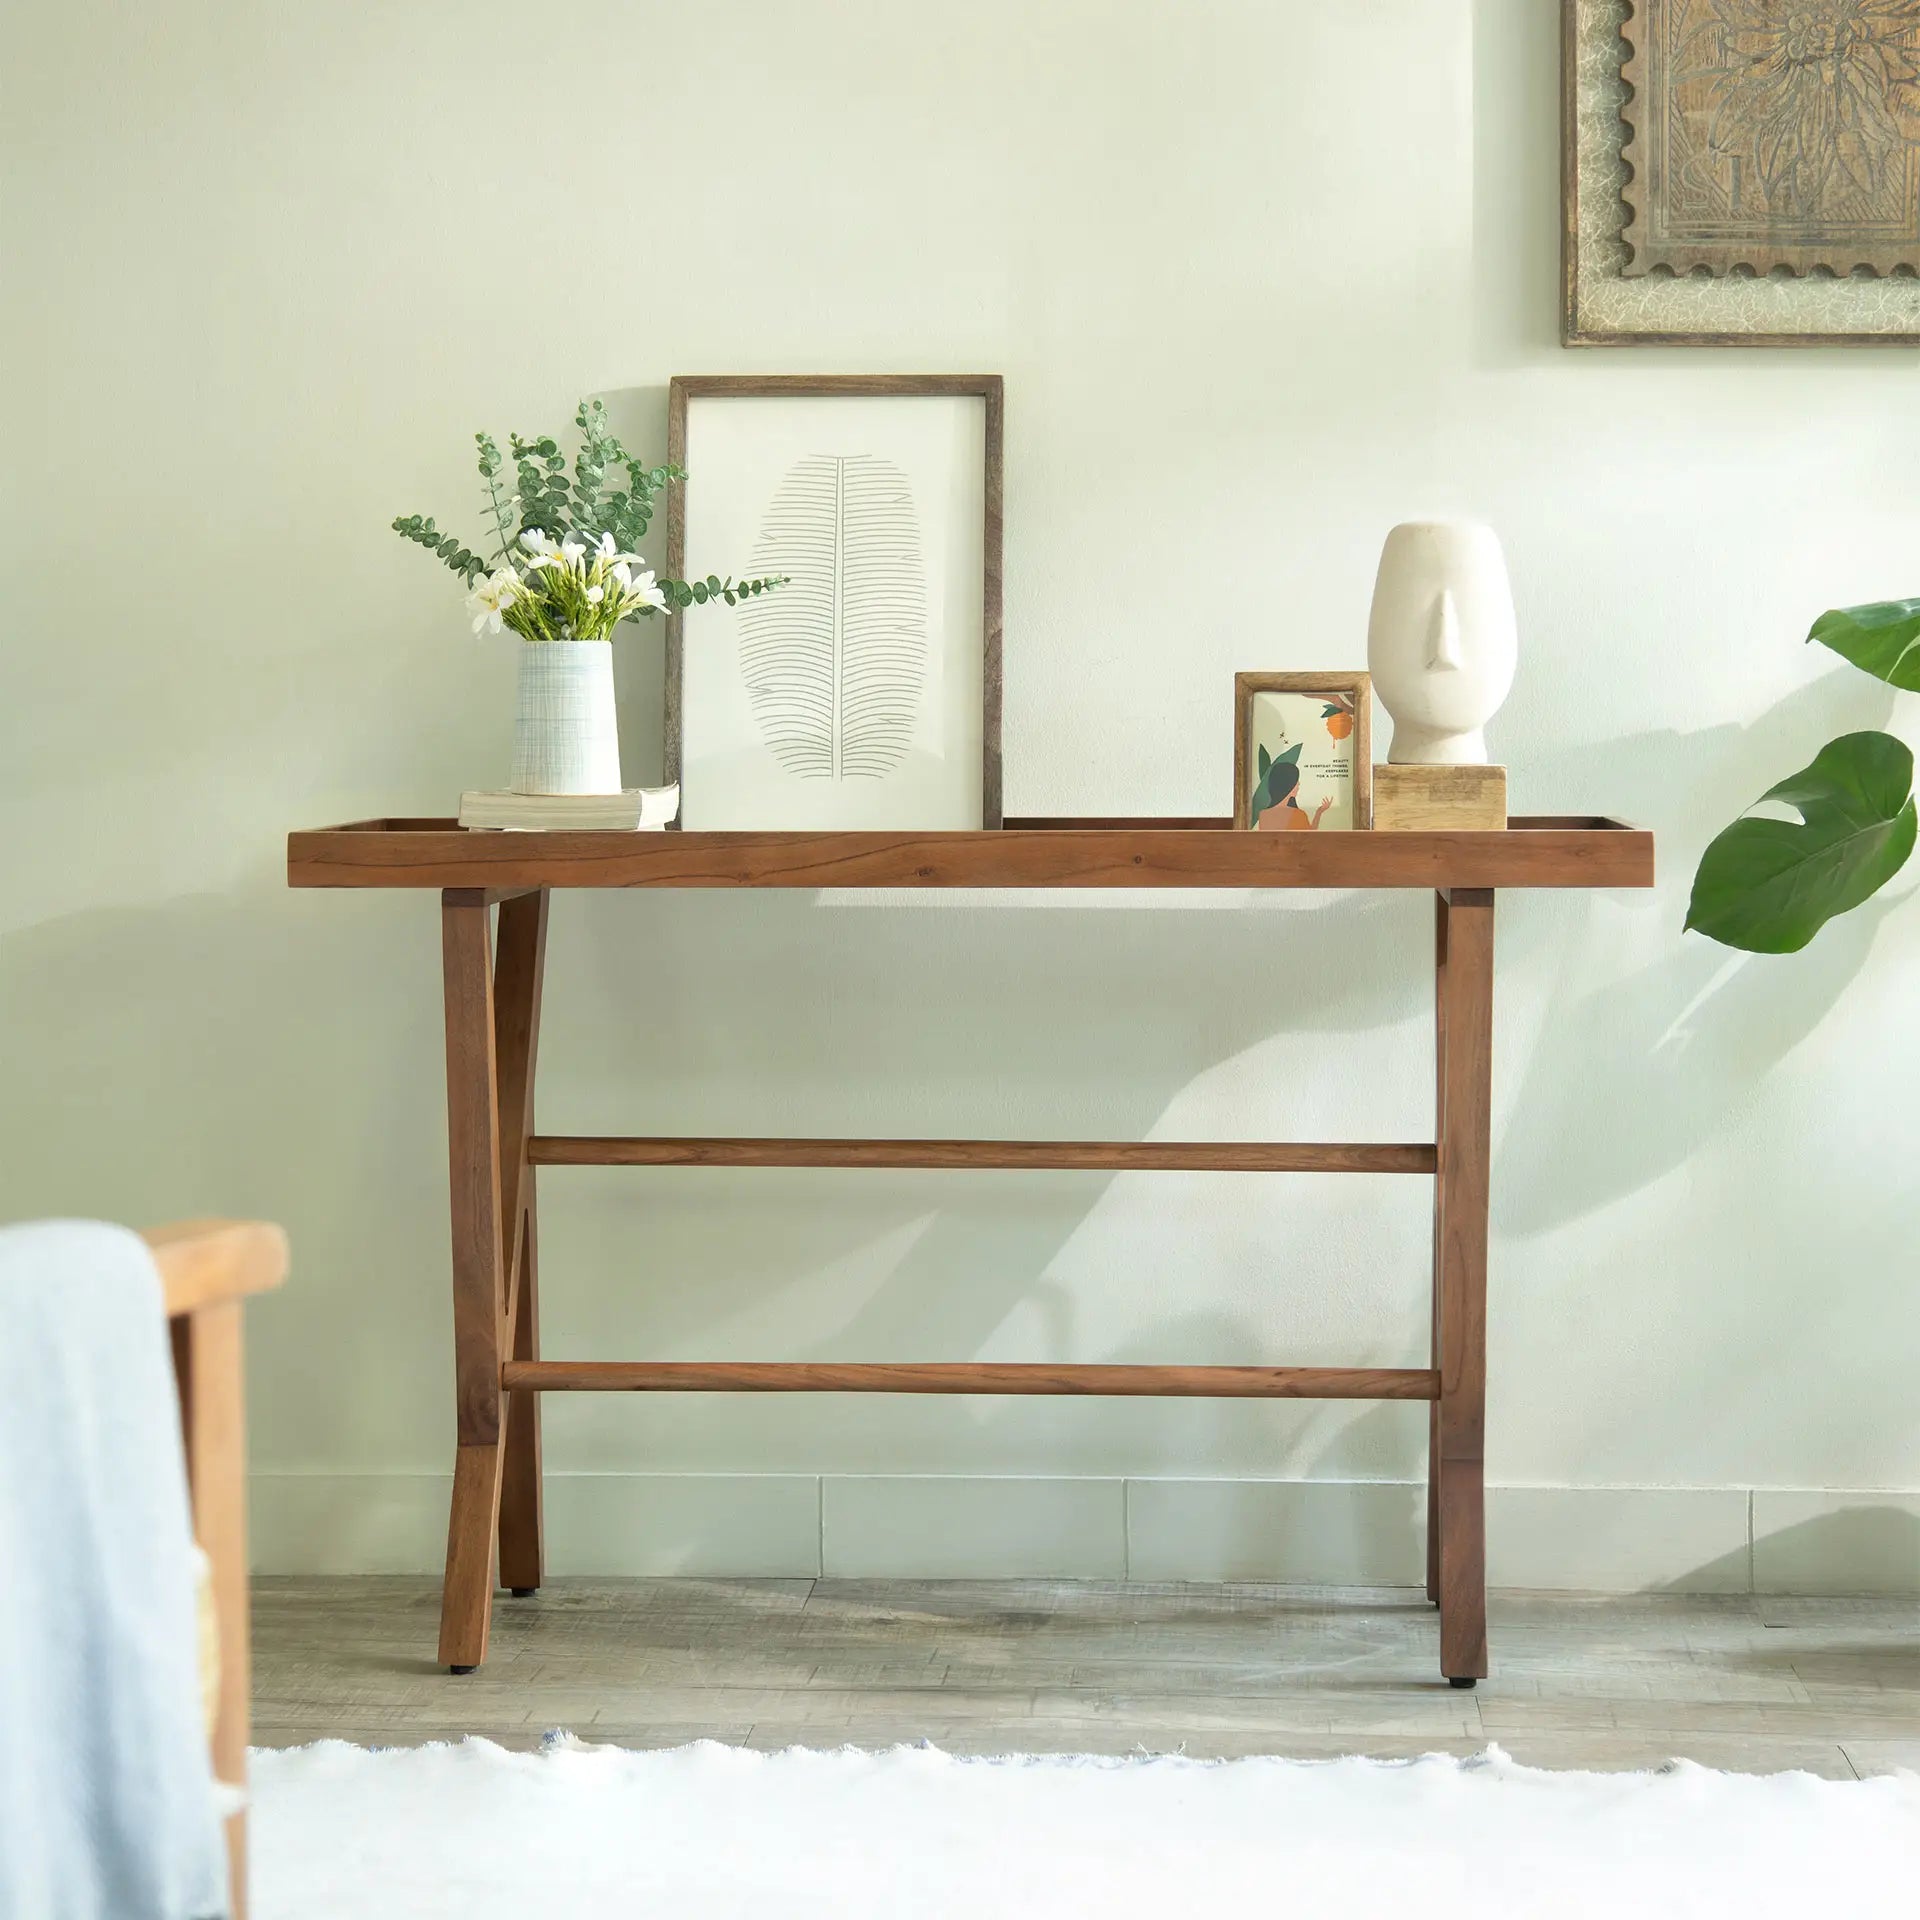 Kayra Ready-to-Assemble Console Table